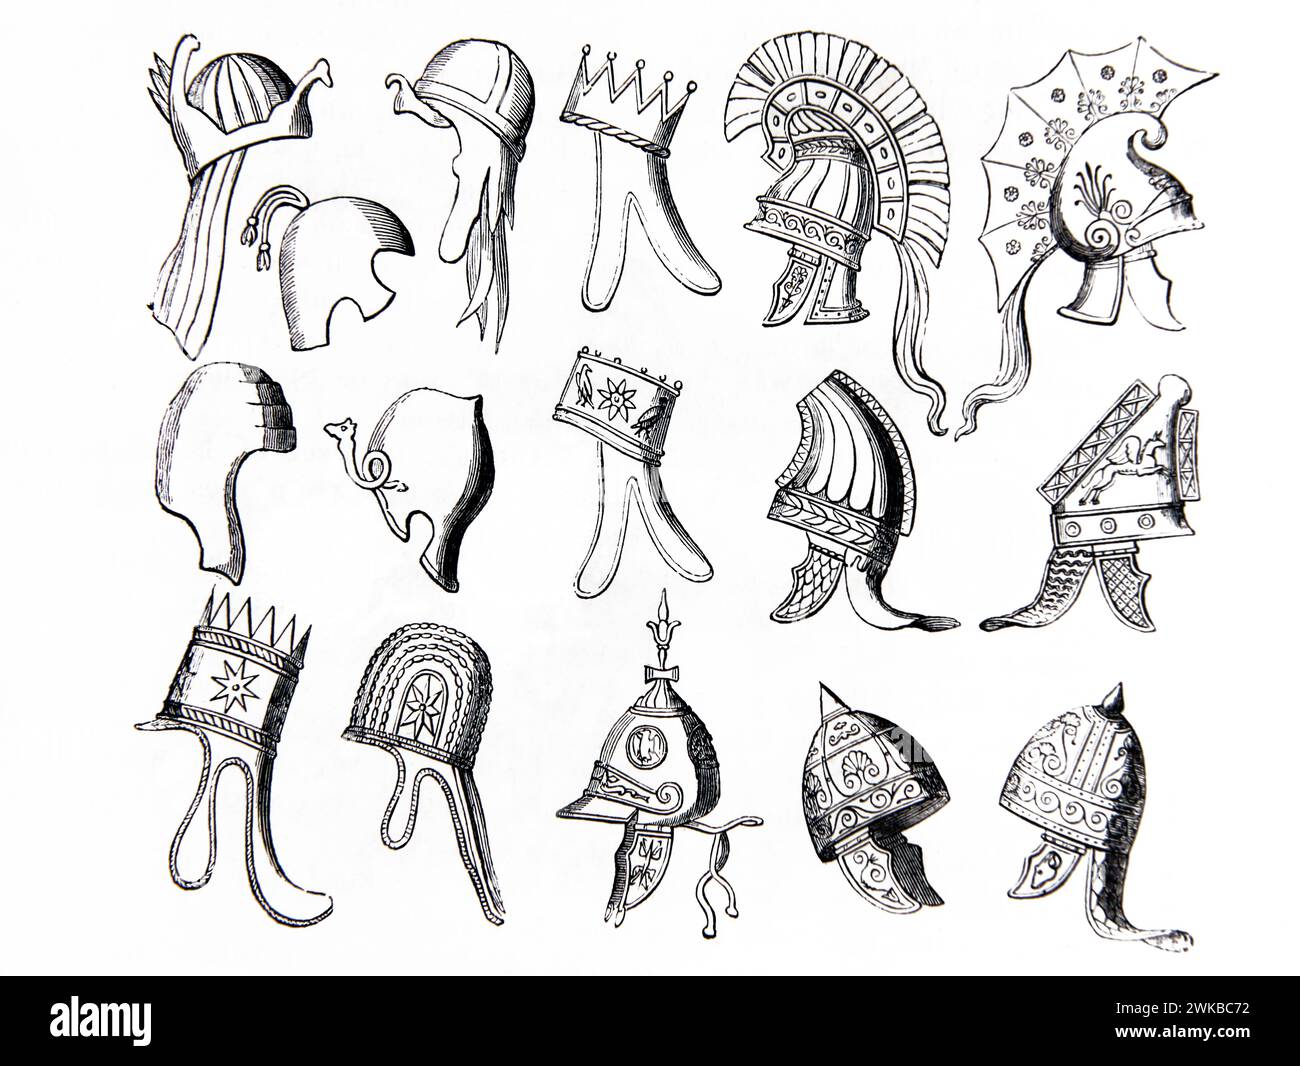 Ancient Helmets worn by Egyptian Warriors, Caps of Egyptian Soldiers, Persian, Syrian, Phrygian and Dacian Solders from Antique Illustrated Family Bib Stock Photo